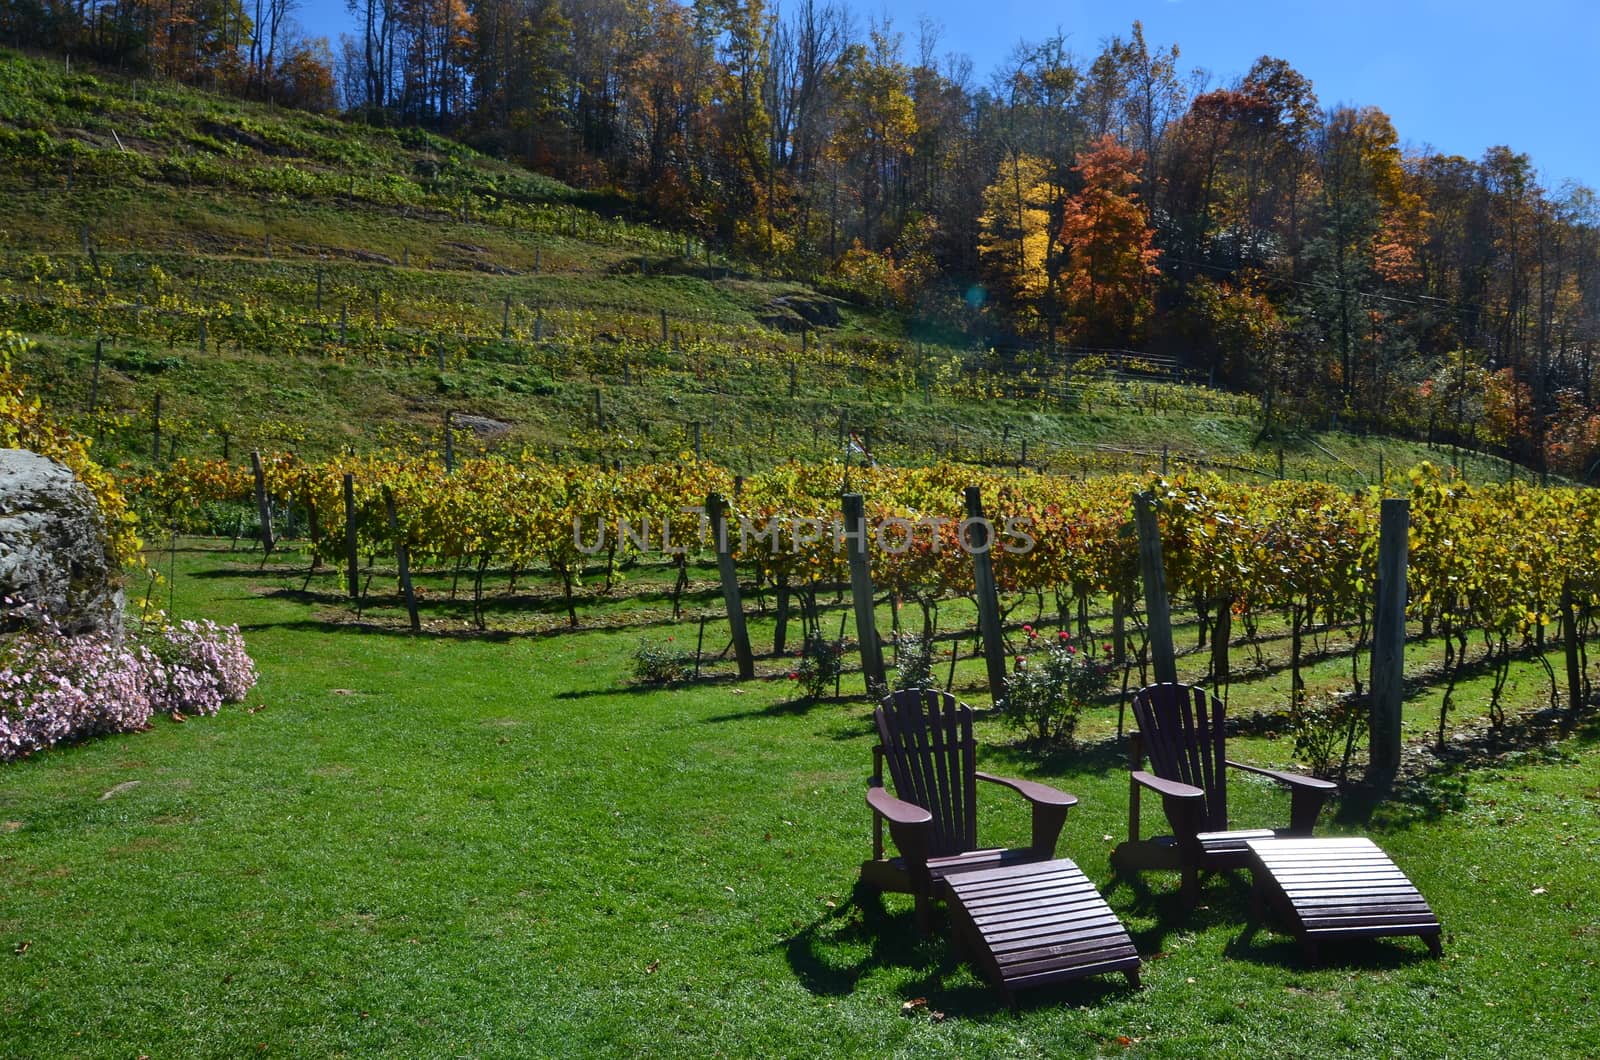 View of a vineyard on the hill in the mountains of North Carolina.